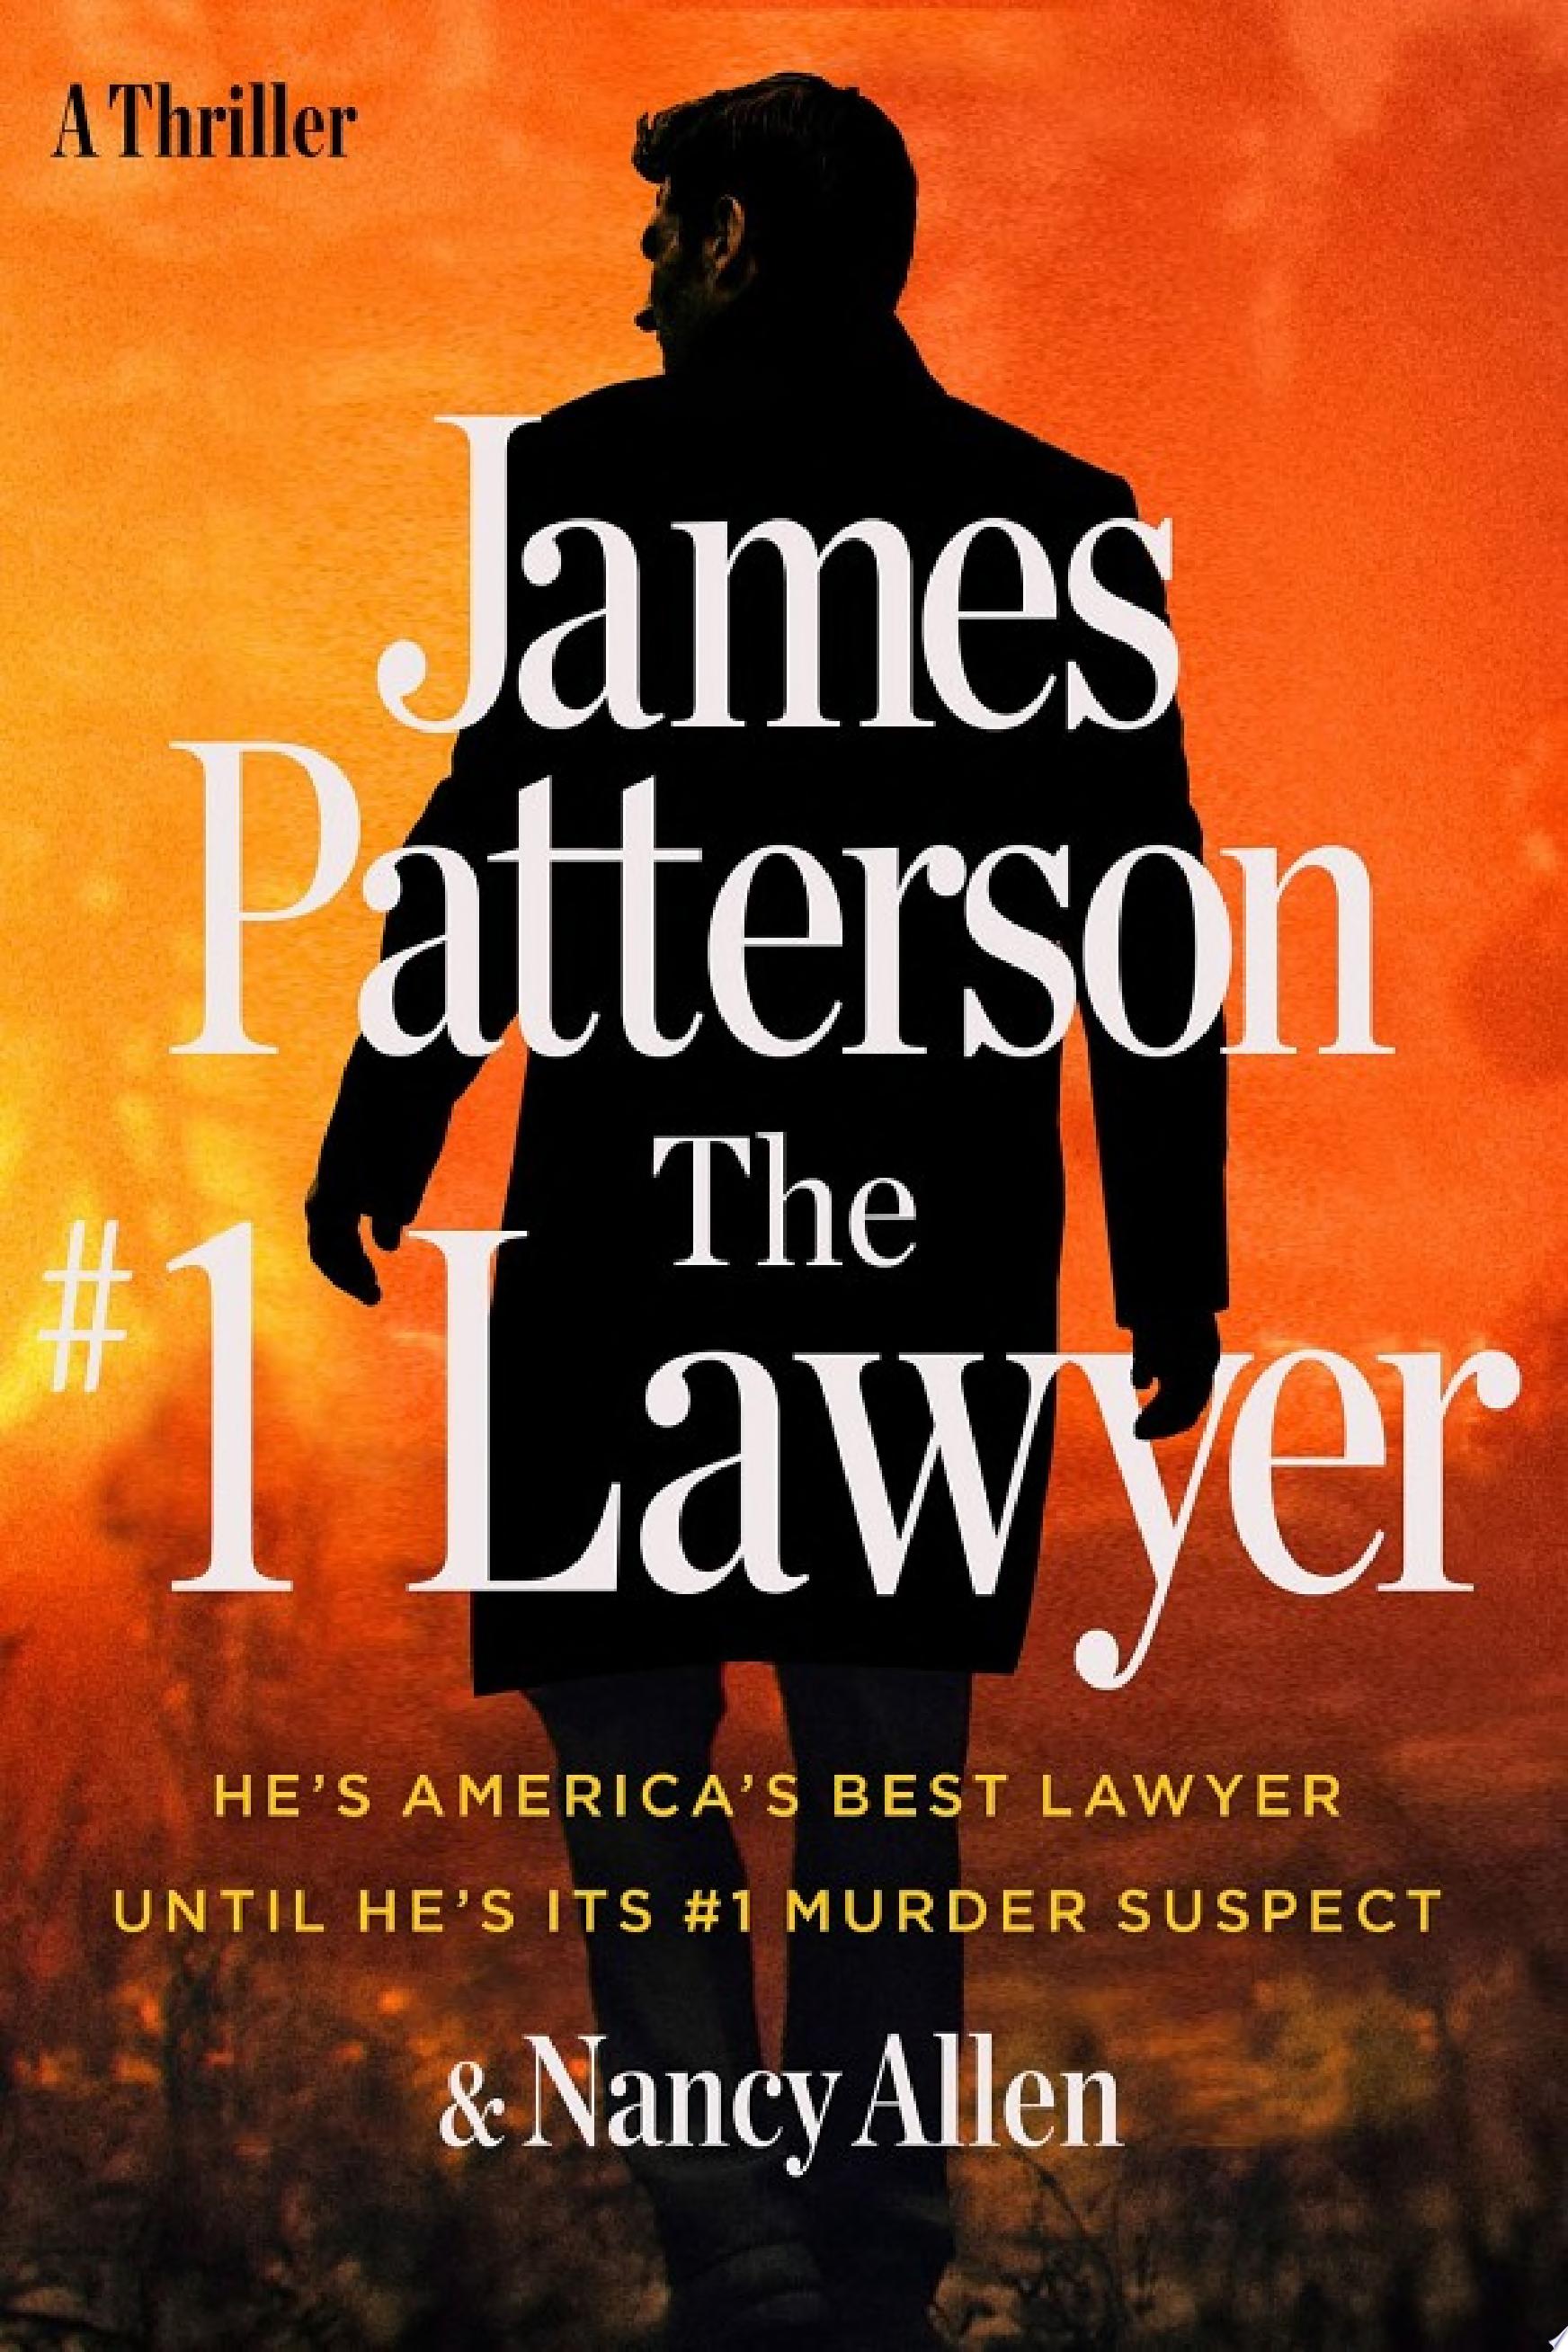 Image for "The #1 Lawyer"